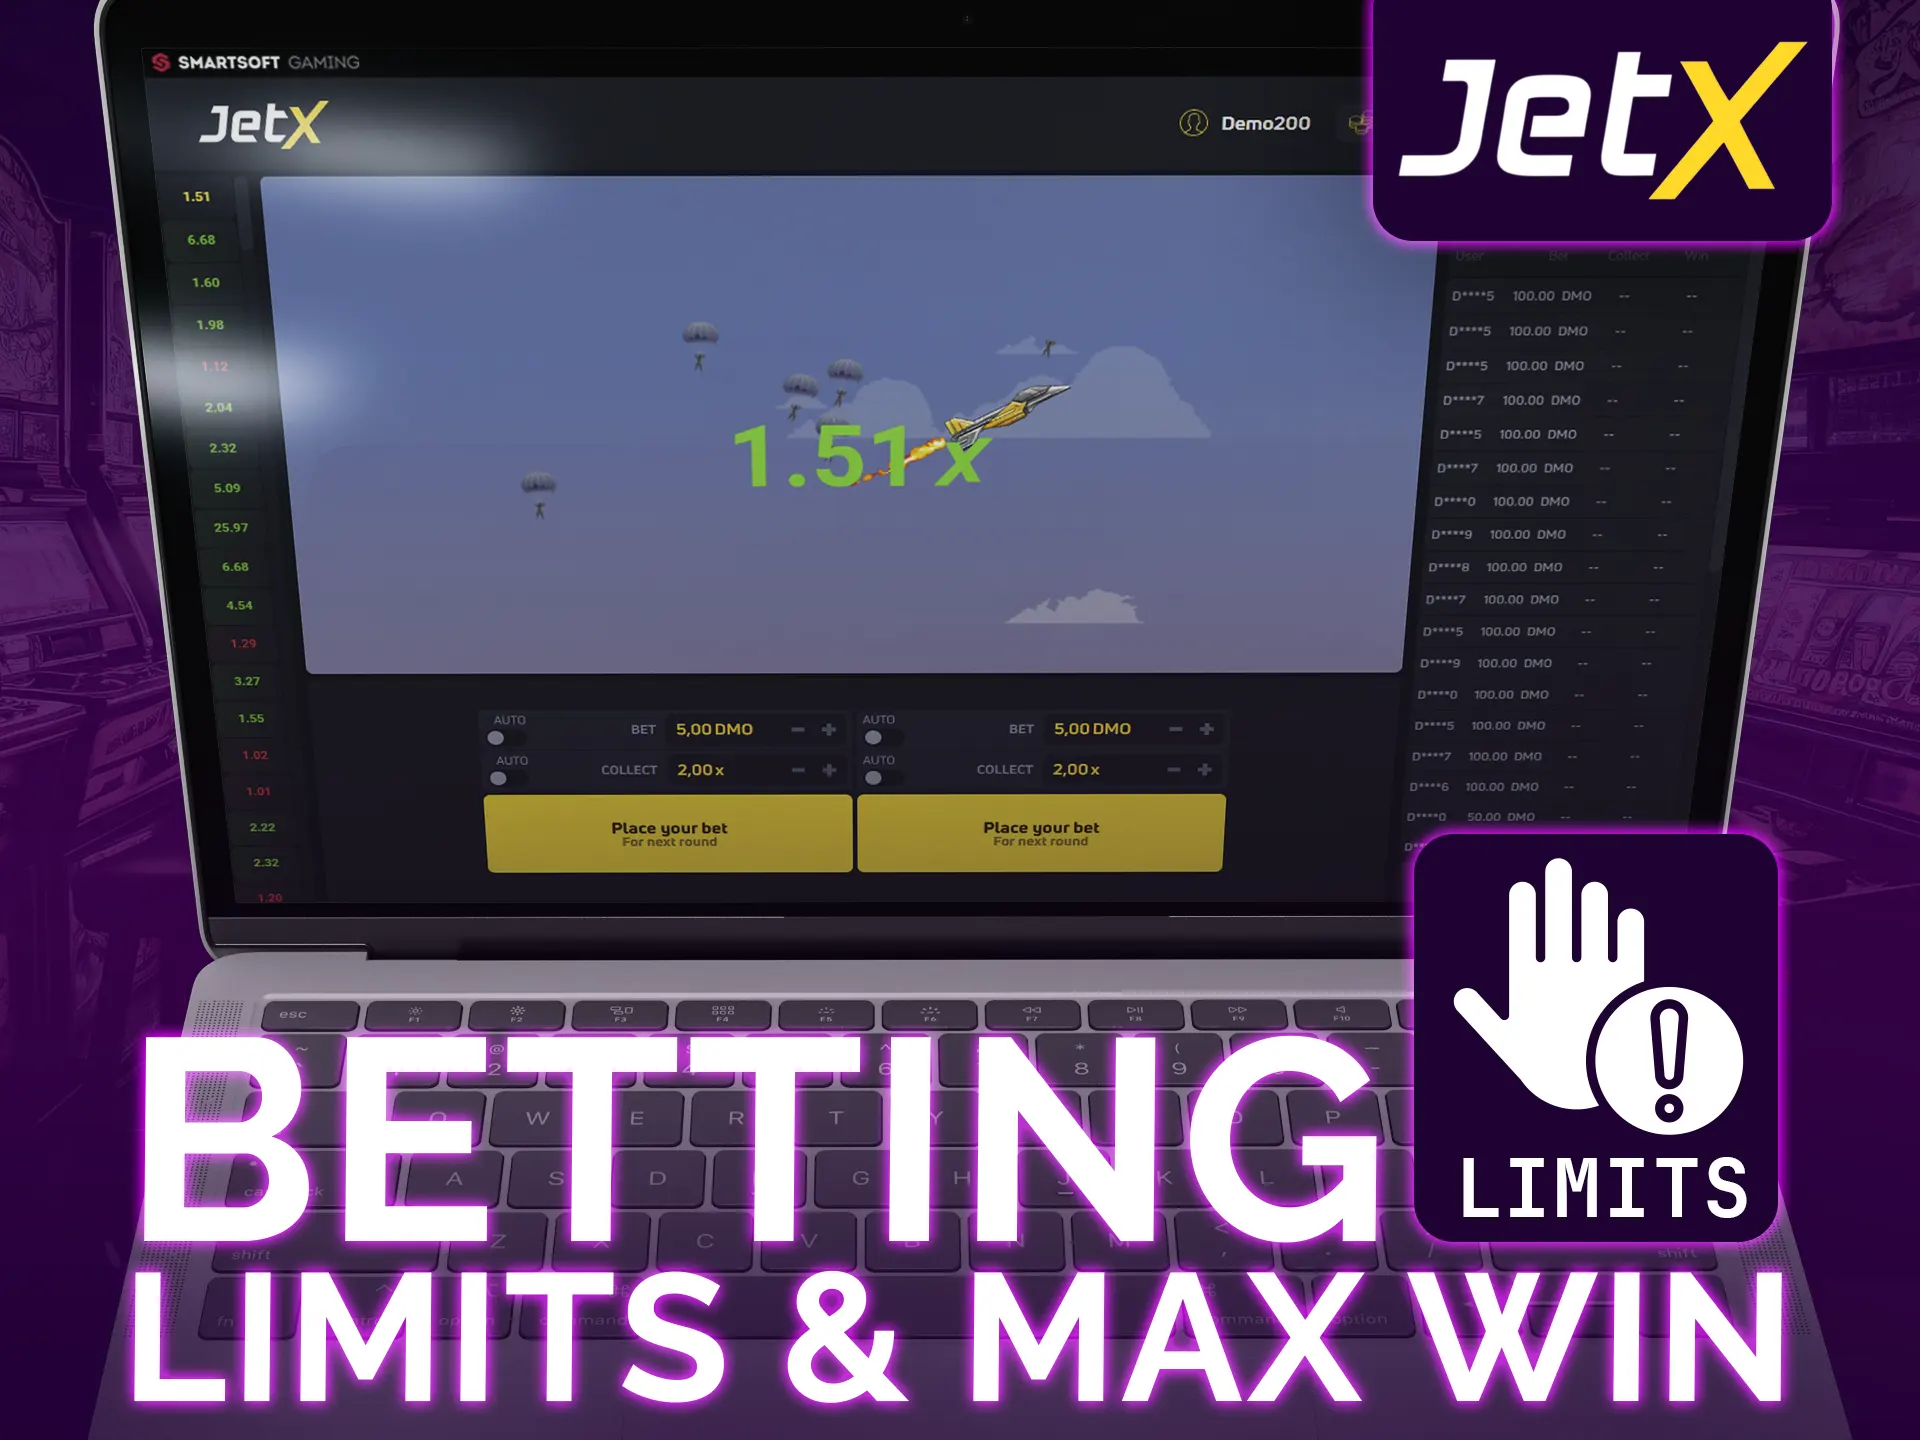 Jet X offers flexible betting and limitless winnings.